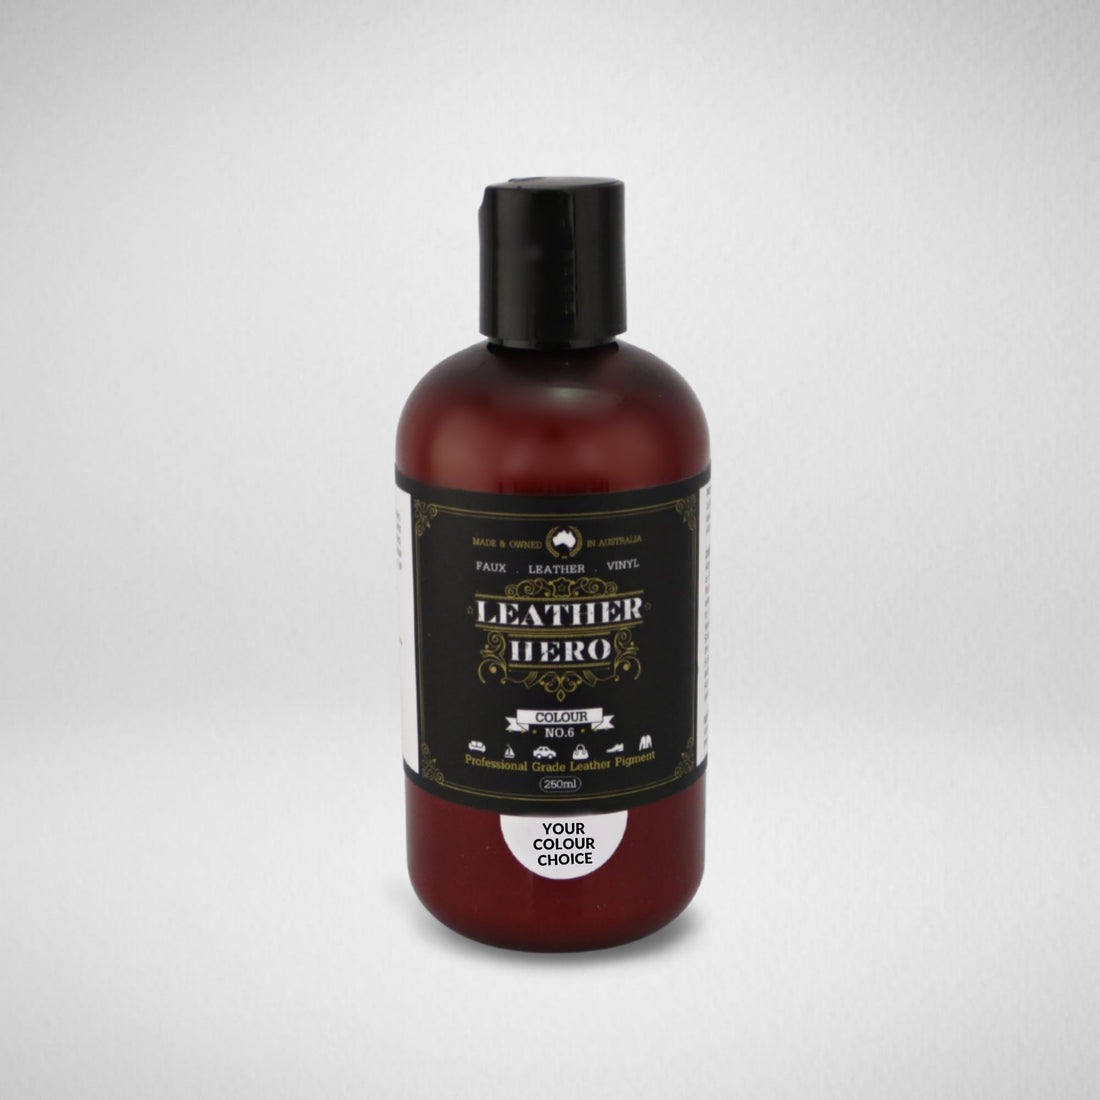 Leather Paint - Shamrock Leather Repair & Recolouring Leather Hero Australia